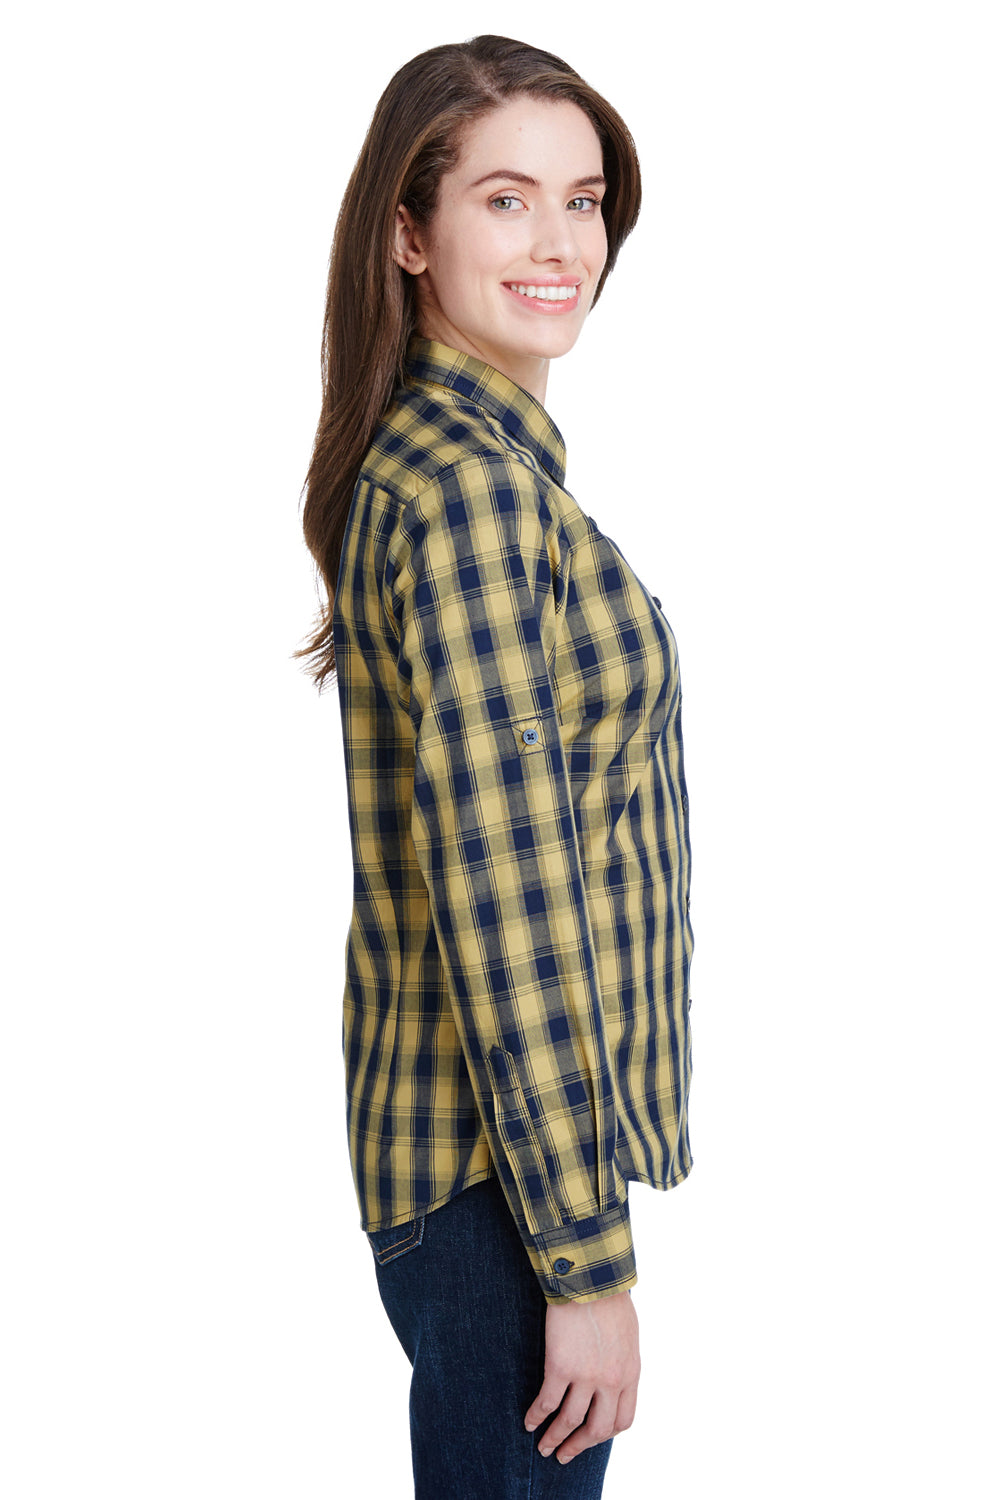 Artisan Collection RP350 Womens Mulligan Check Long Sleeve Button Down Shirt Camel Brown/Navy Blue Model Side